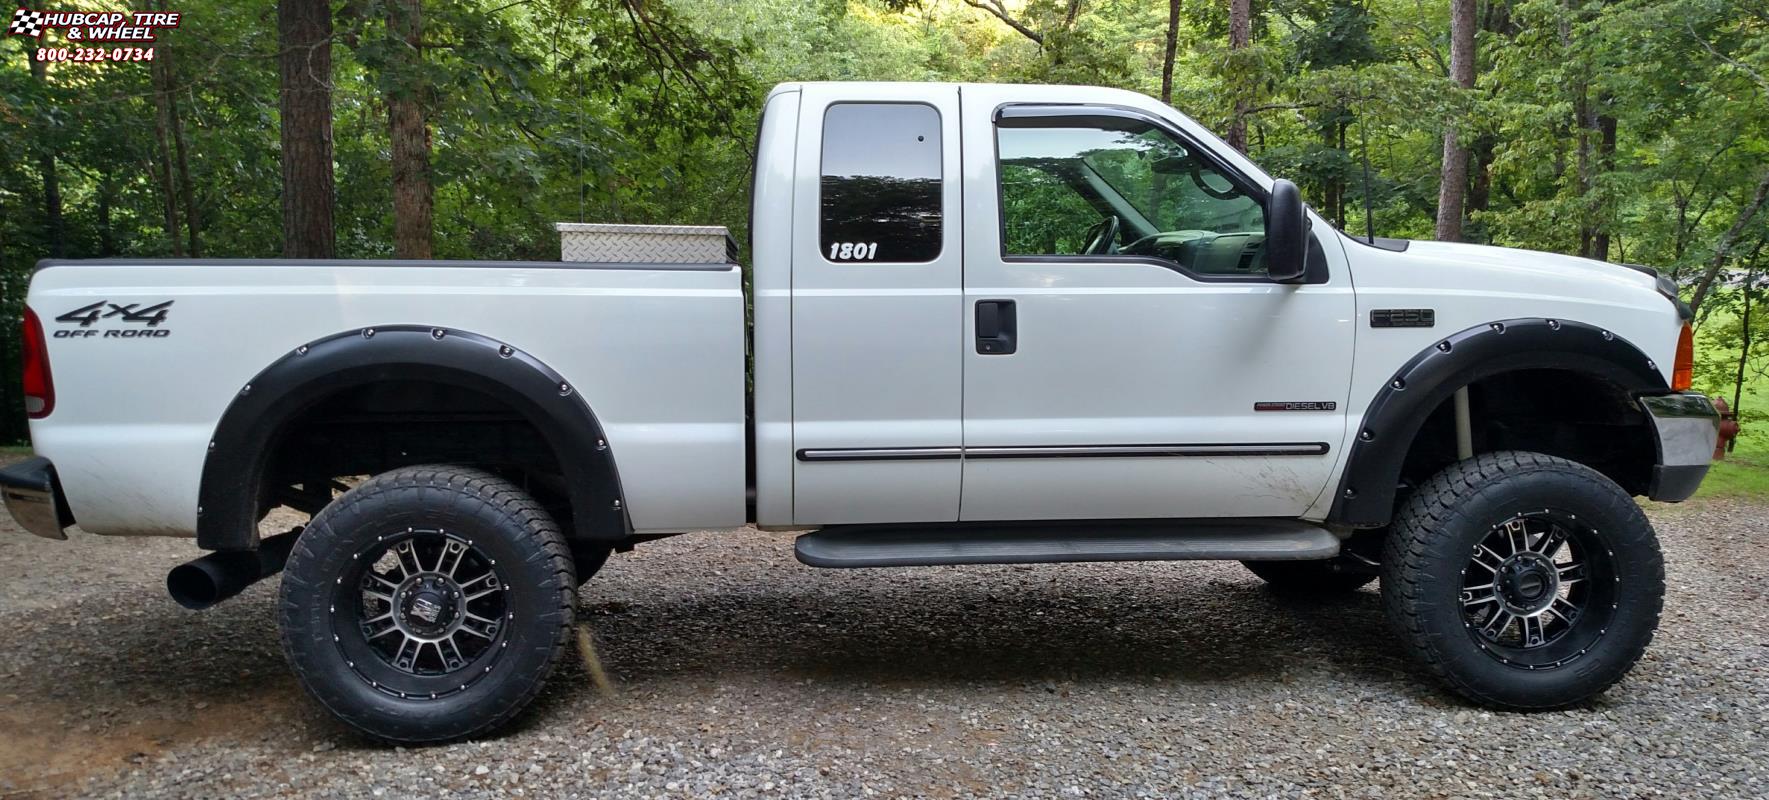 vehicle gallery/2000 ford f 250 xd series xd809 riot 20x10  Matte Black Machined wheels and rims